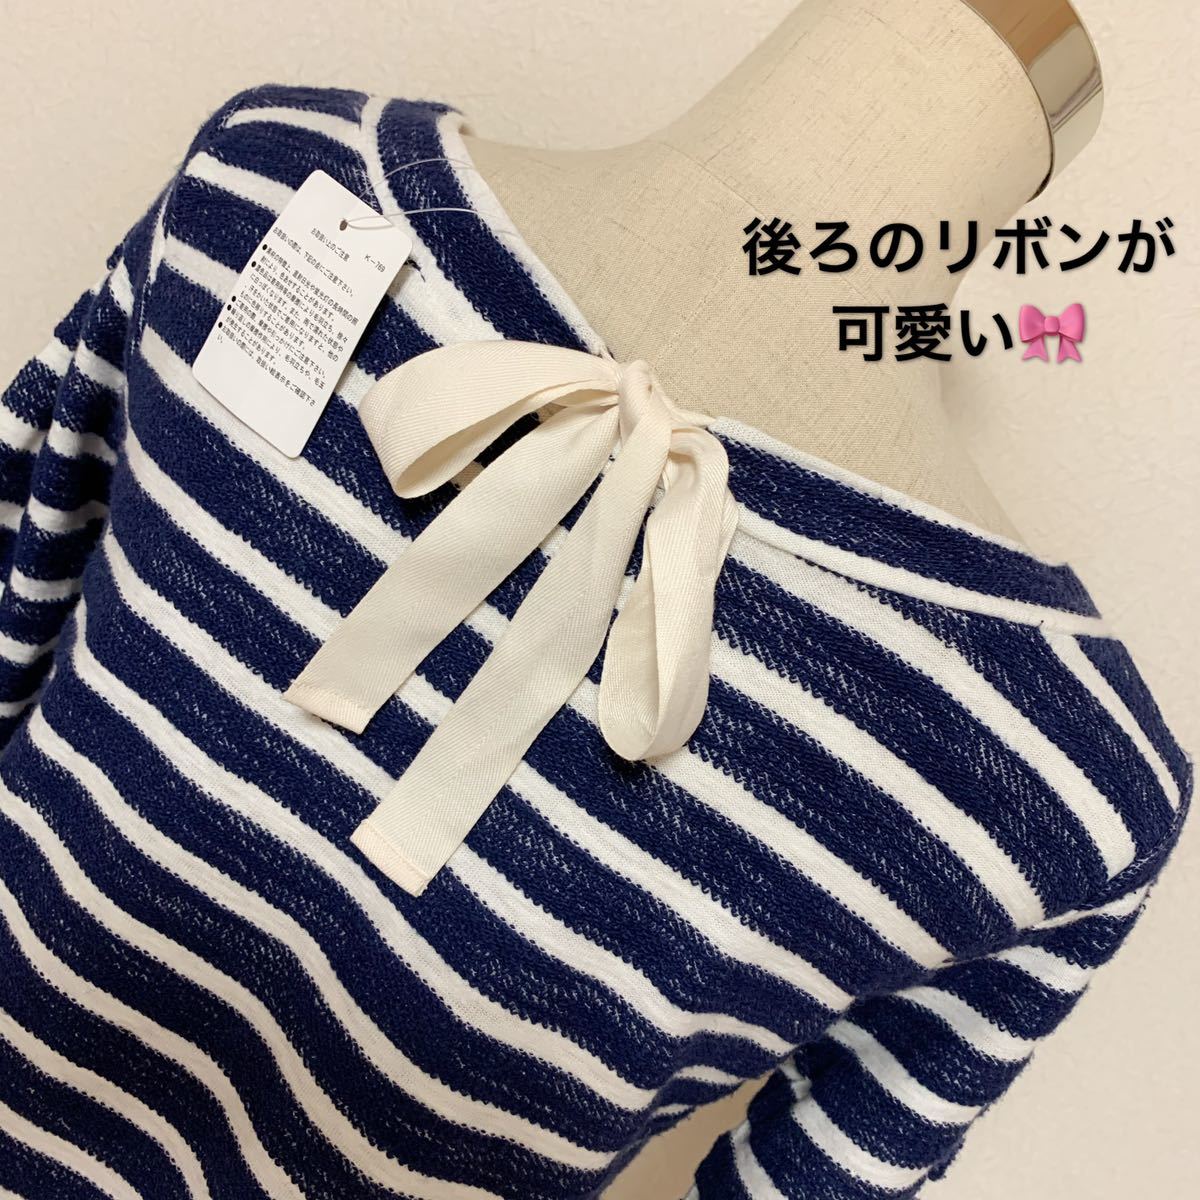 NATURAL BEAUTY BASIC One-piece, new goods unused border, lady's super-discount wonderful brand on goods pretty stylish going to school commuting te-to tag attaching 